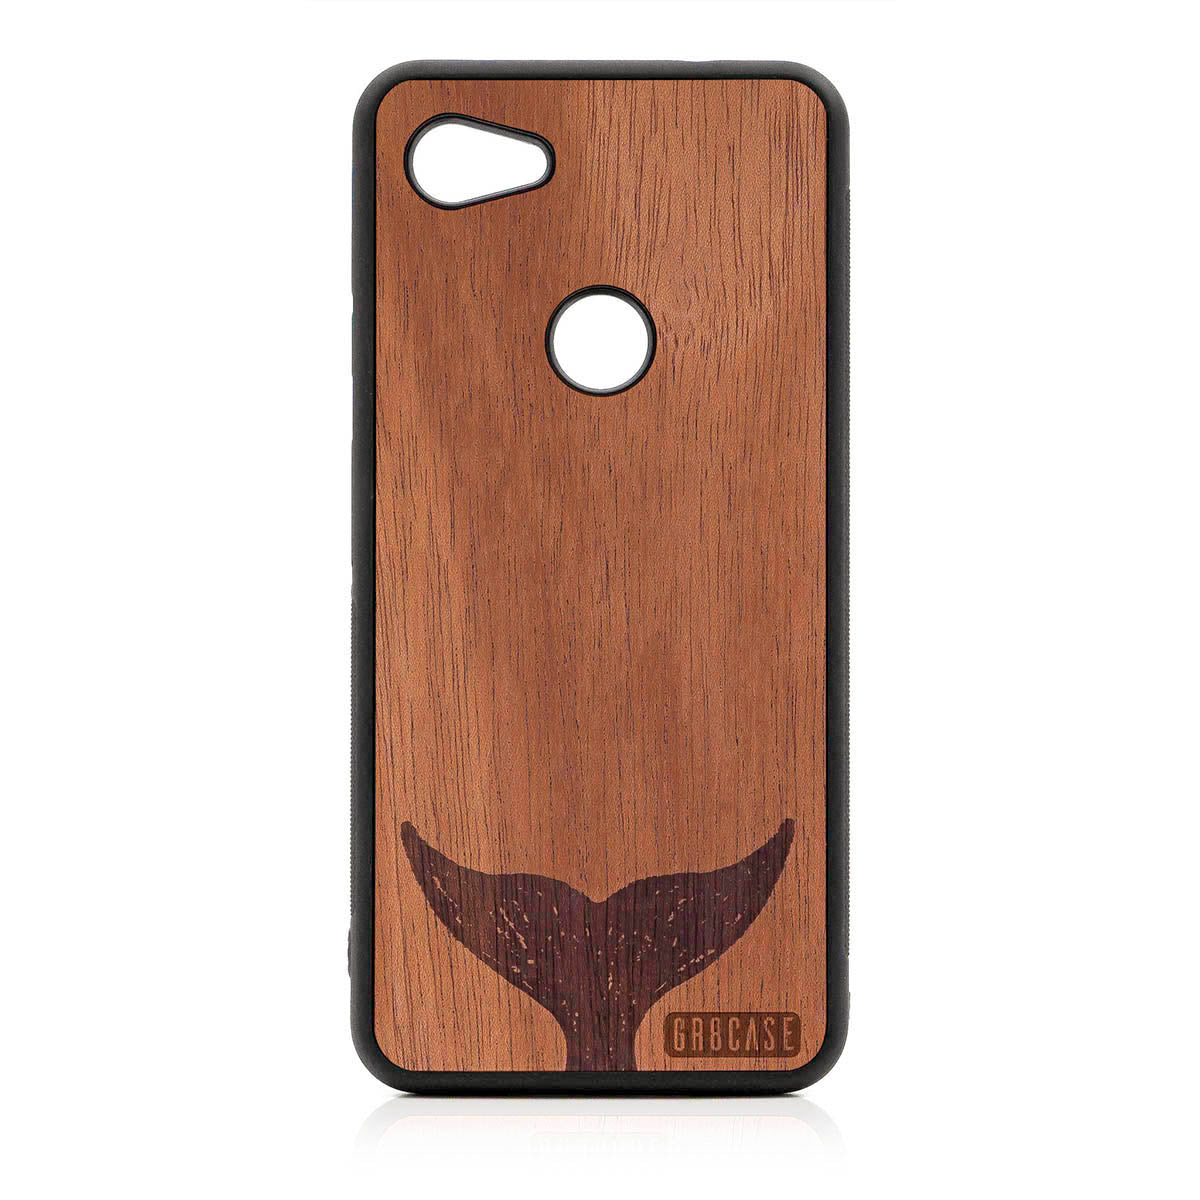 Whale Tail Design Wood Case For Google Pixel 3A